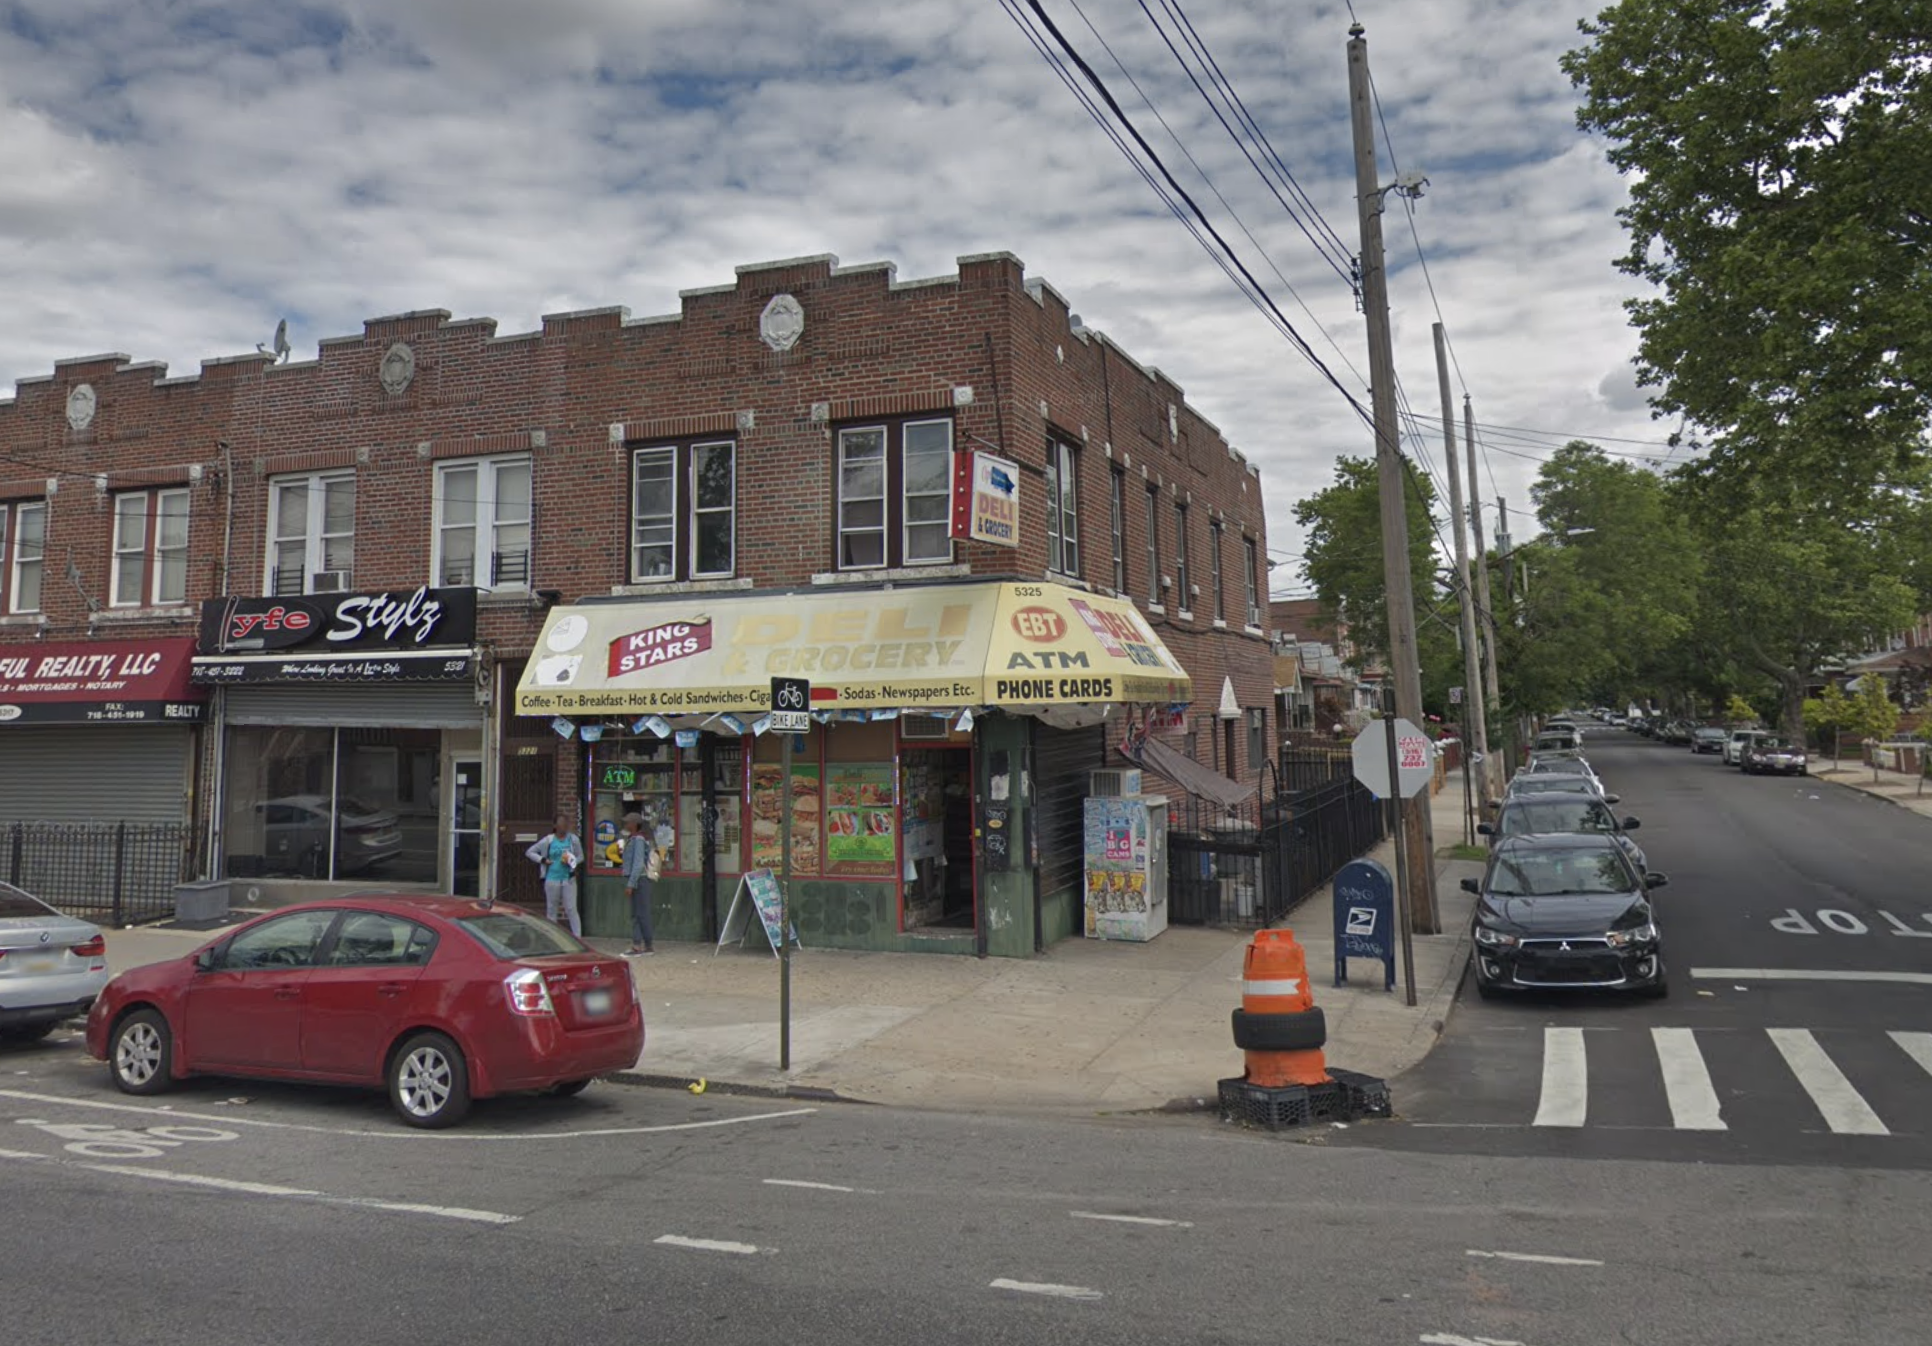 Yesterday: Man Shot And Killed in East Flatbush in the Morning, and Another in Bed Stuy in the Evening